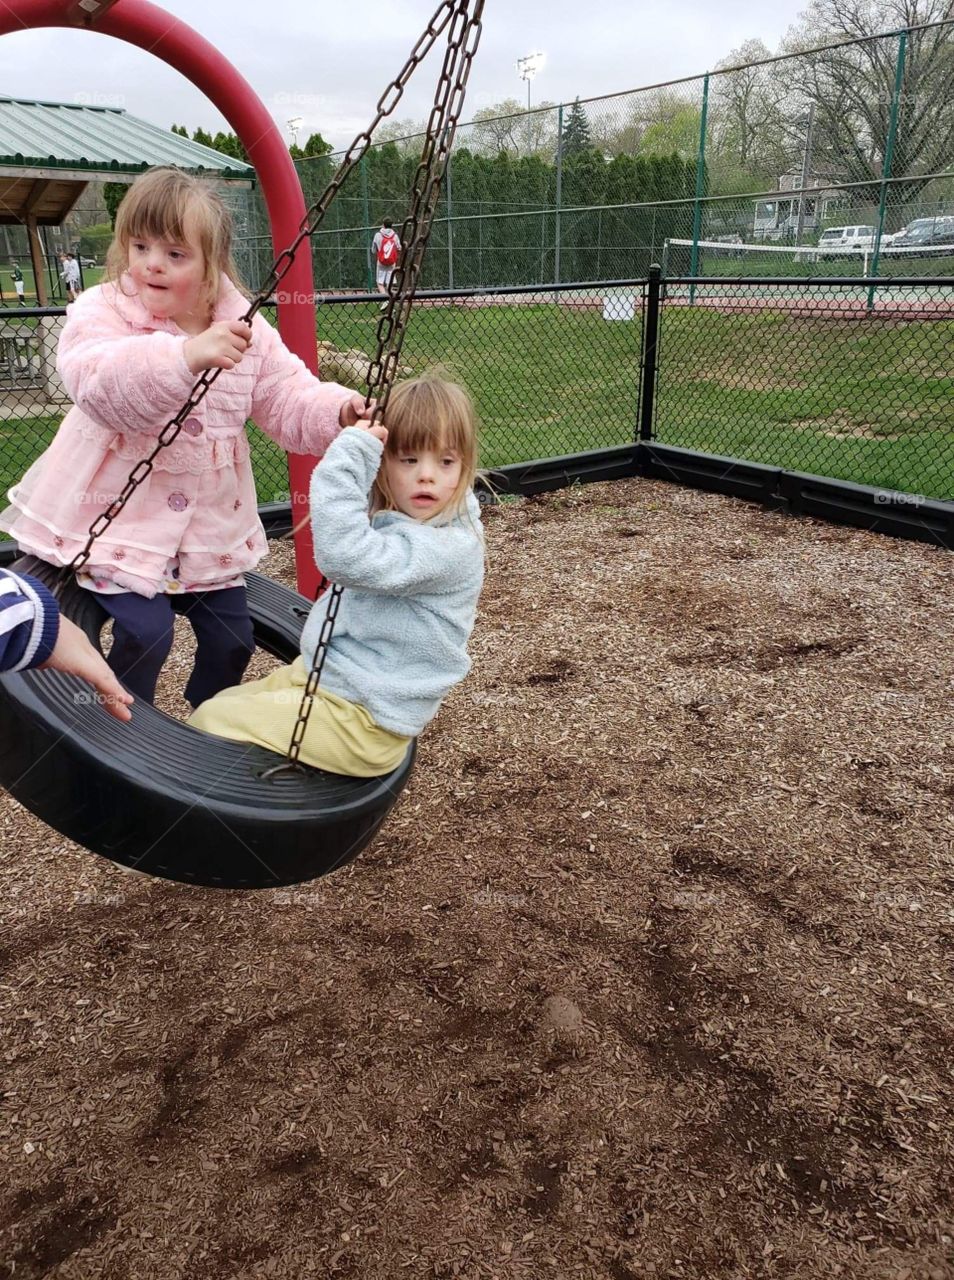 Two biological sisters with Down syndrome swinging 